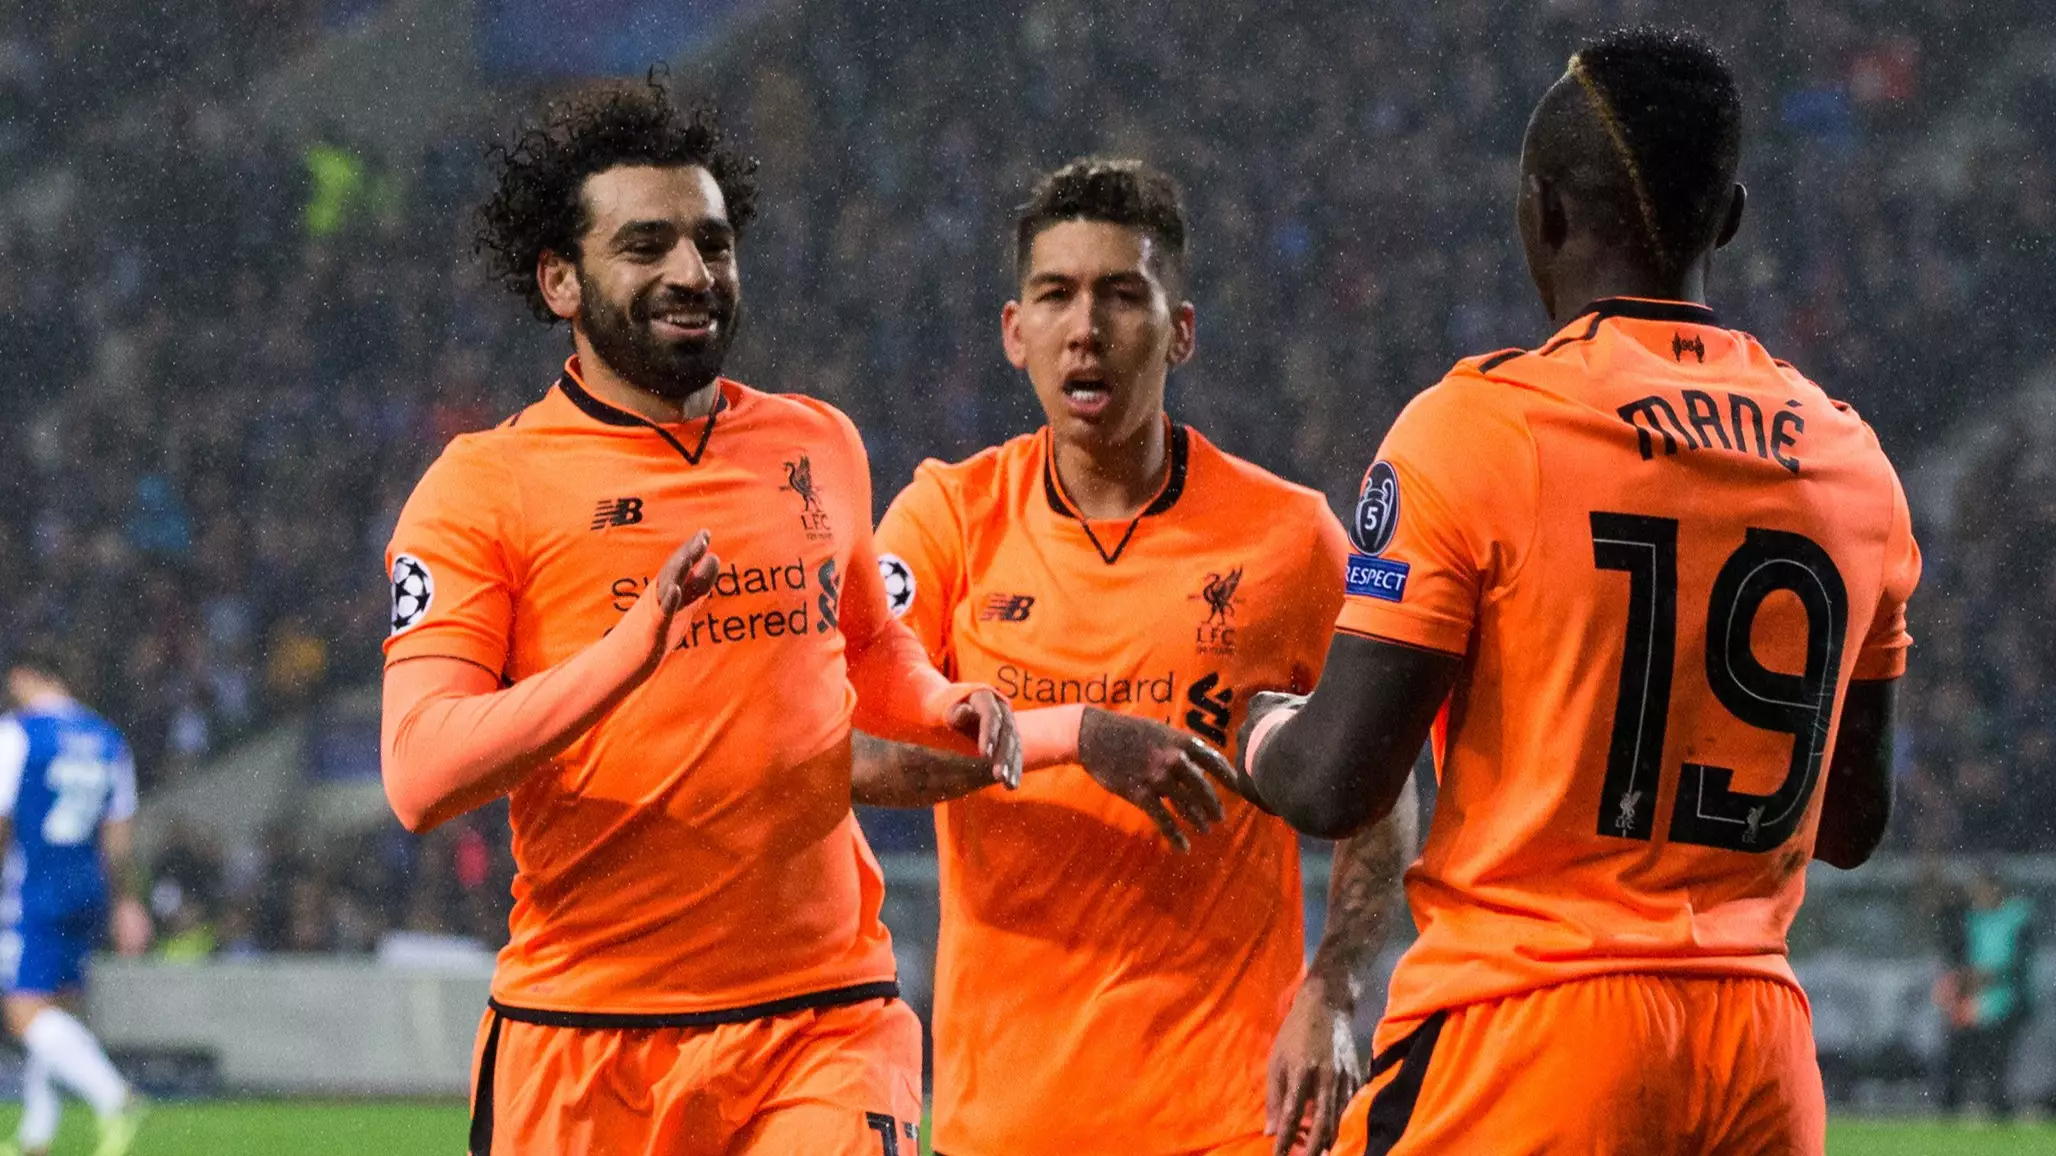 Salah, Mane And Firmino Are The Highest Scoring Trio In A Single UCL Campaign